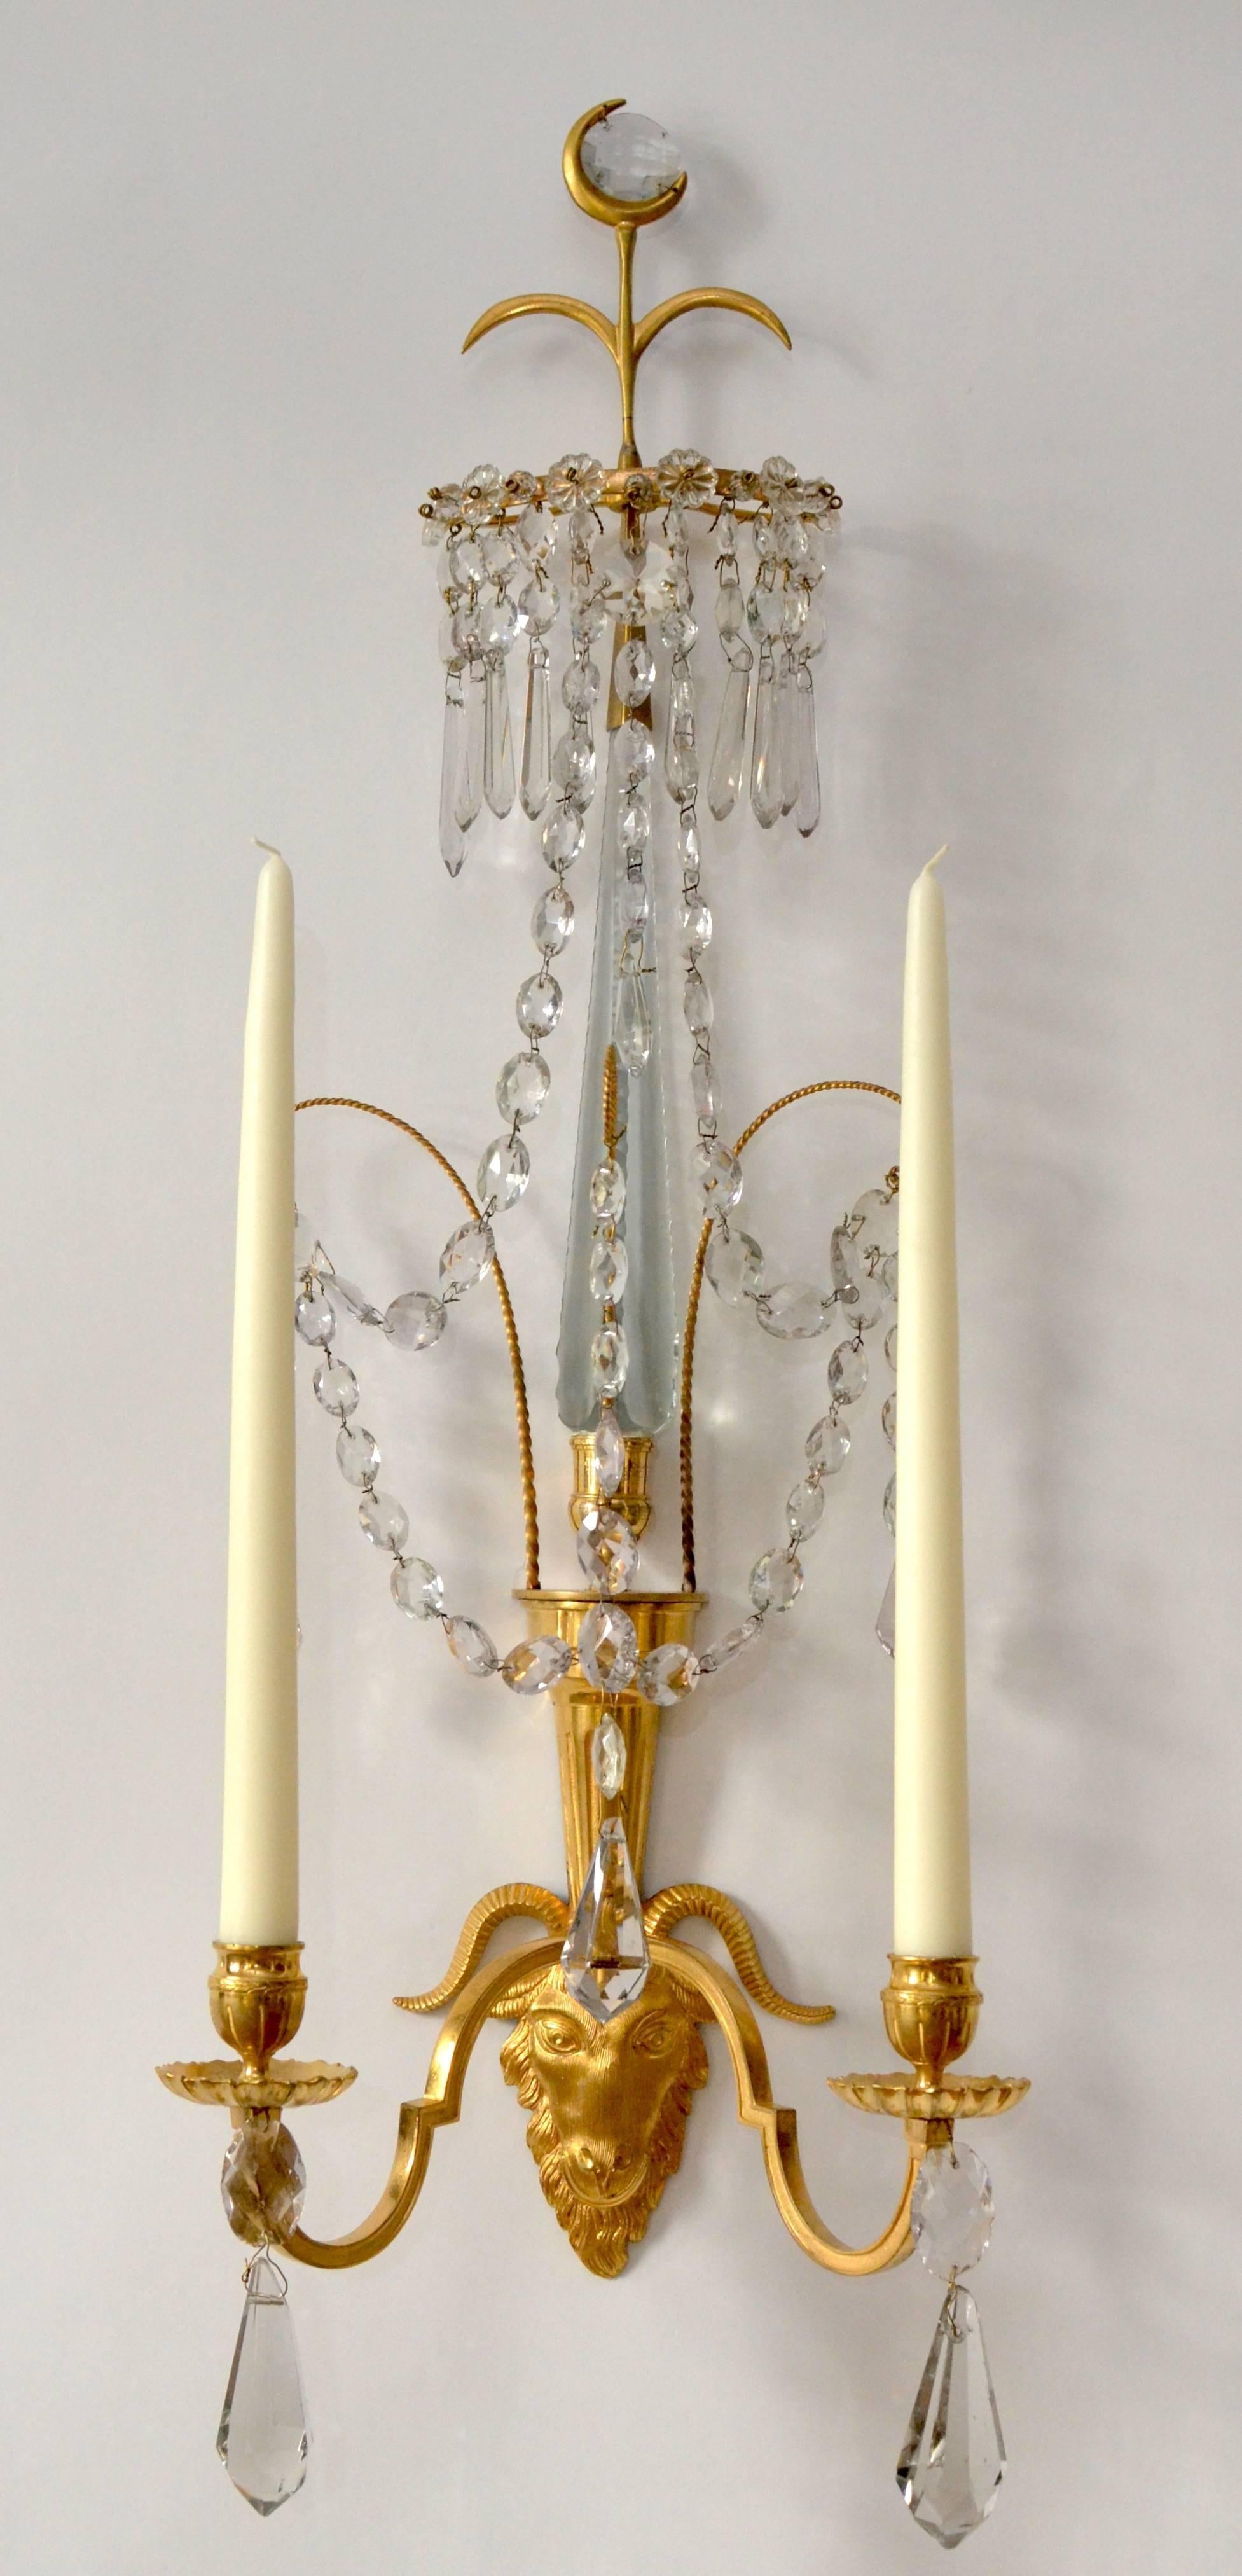 A pair of Swedish gilt bronze and crystal wall lights, late 18th century.